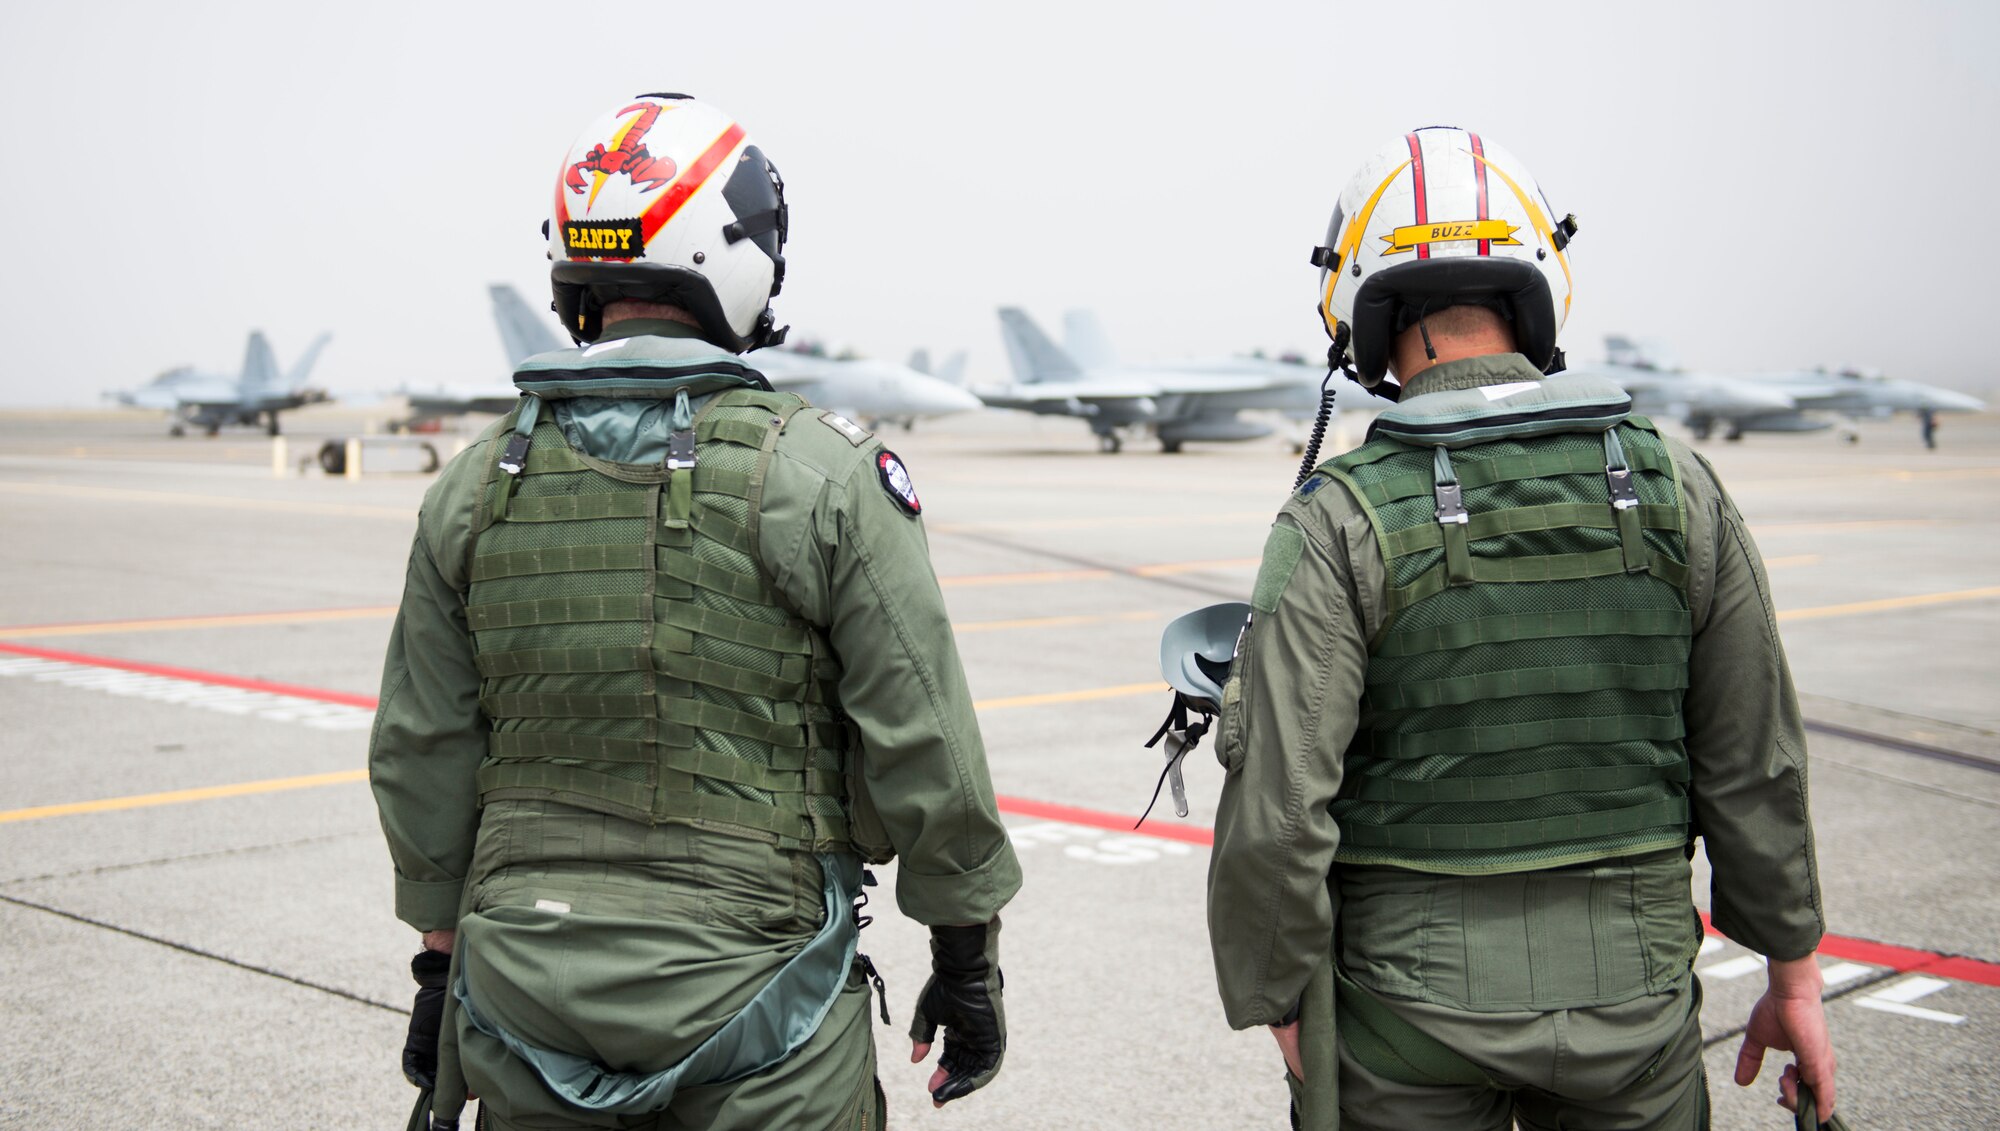 U.S. Air Force Lt. Col. Don Keen, 390th Electronic Combat Squadron commander, and Lt. Randy Scoby, VAQ-129 EA-18G Growler electronic warfare officer, talk before a flight on the EA-18G Growler at Naval Air Station Whidbey Island, Wash., August 7, 2014. The missions of the Growler will be strategic resources for Air Force aircrew and combat forces. (U.S. Air Force photo by Airman 1st Class Malissa Lott/RELEASED)